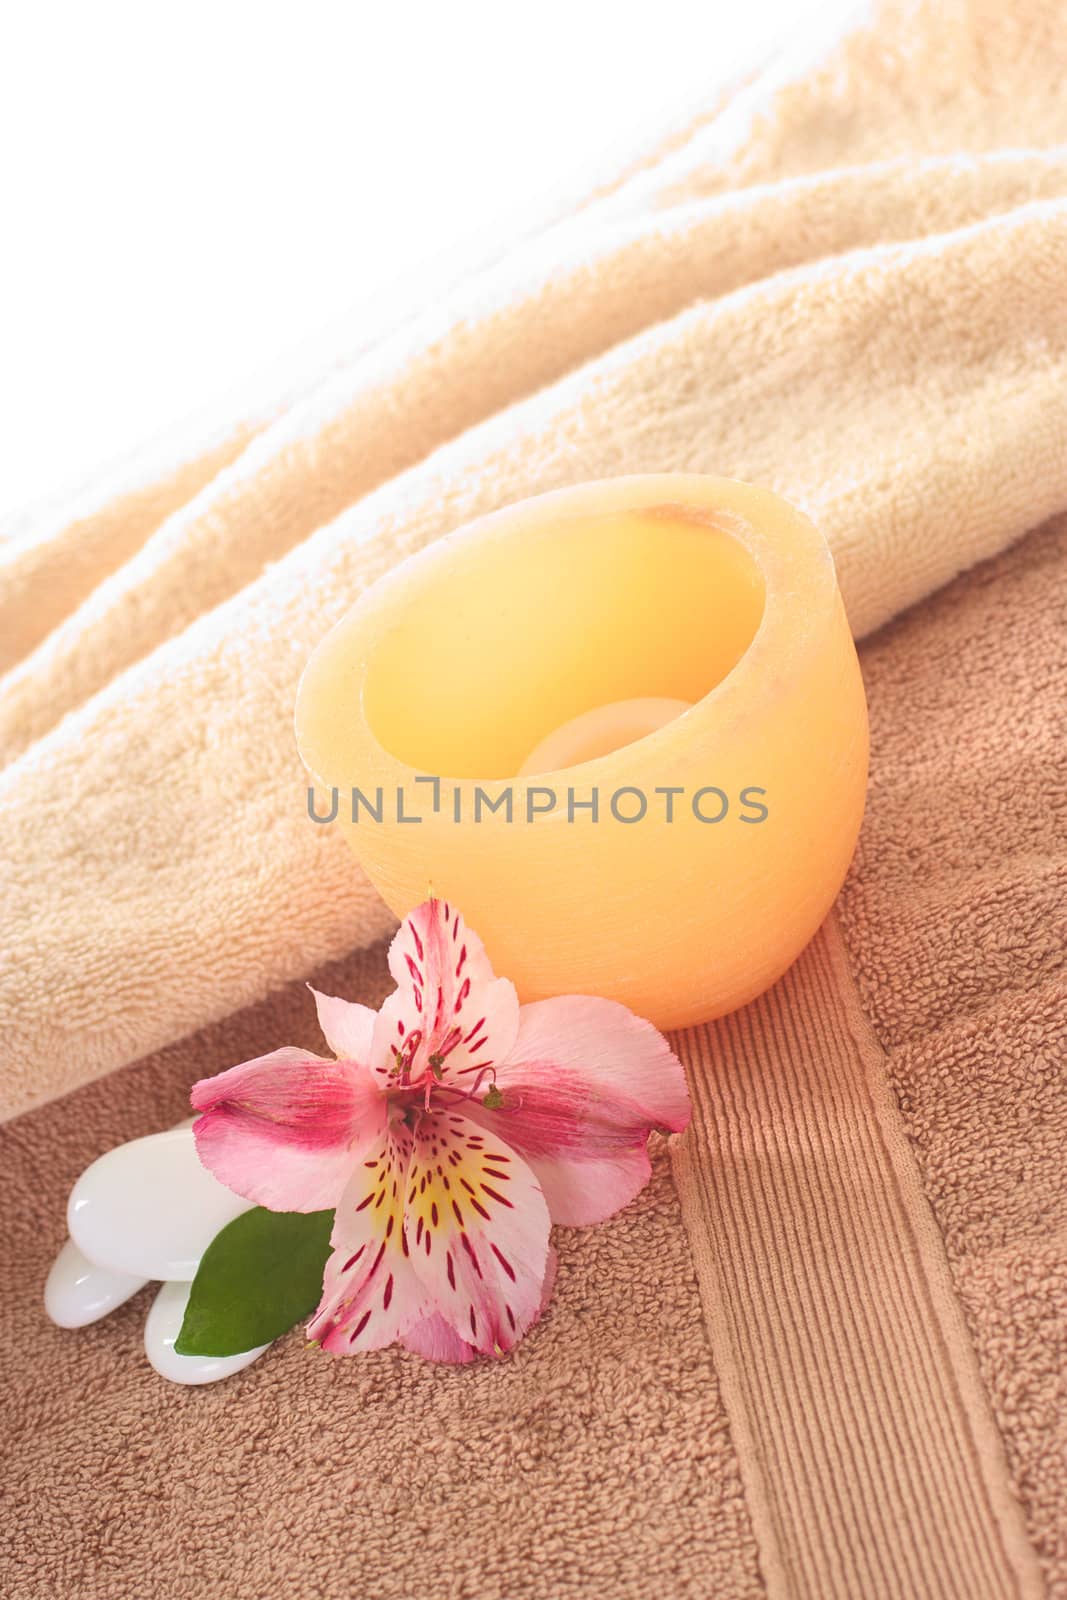 Spa still life with Inca Lily and candle on towel (Selective Focus, Focus on the front of the candle and the flower)